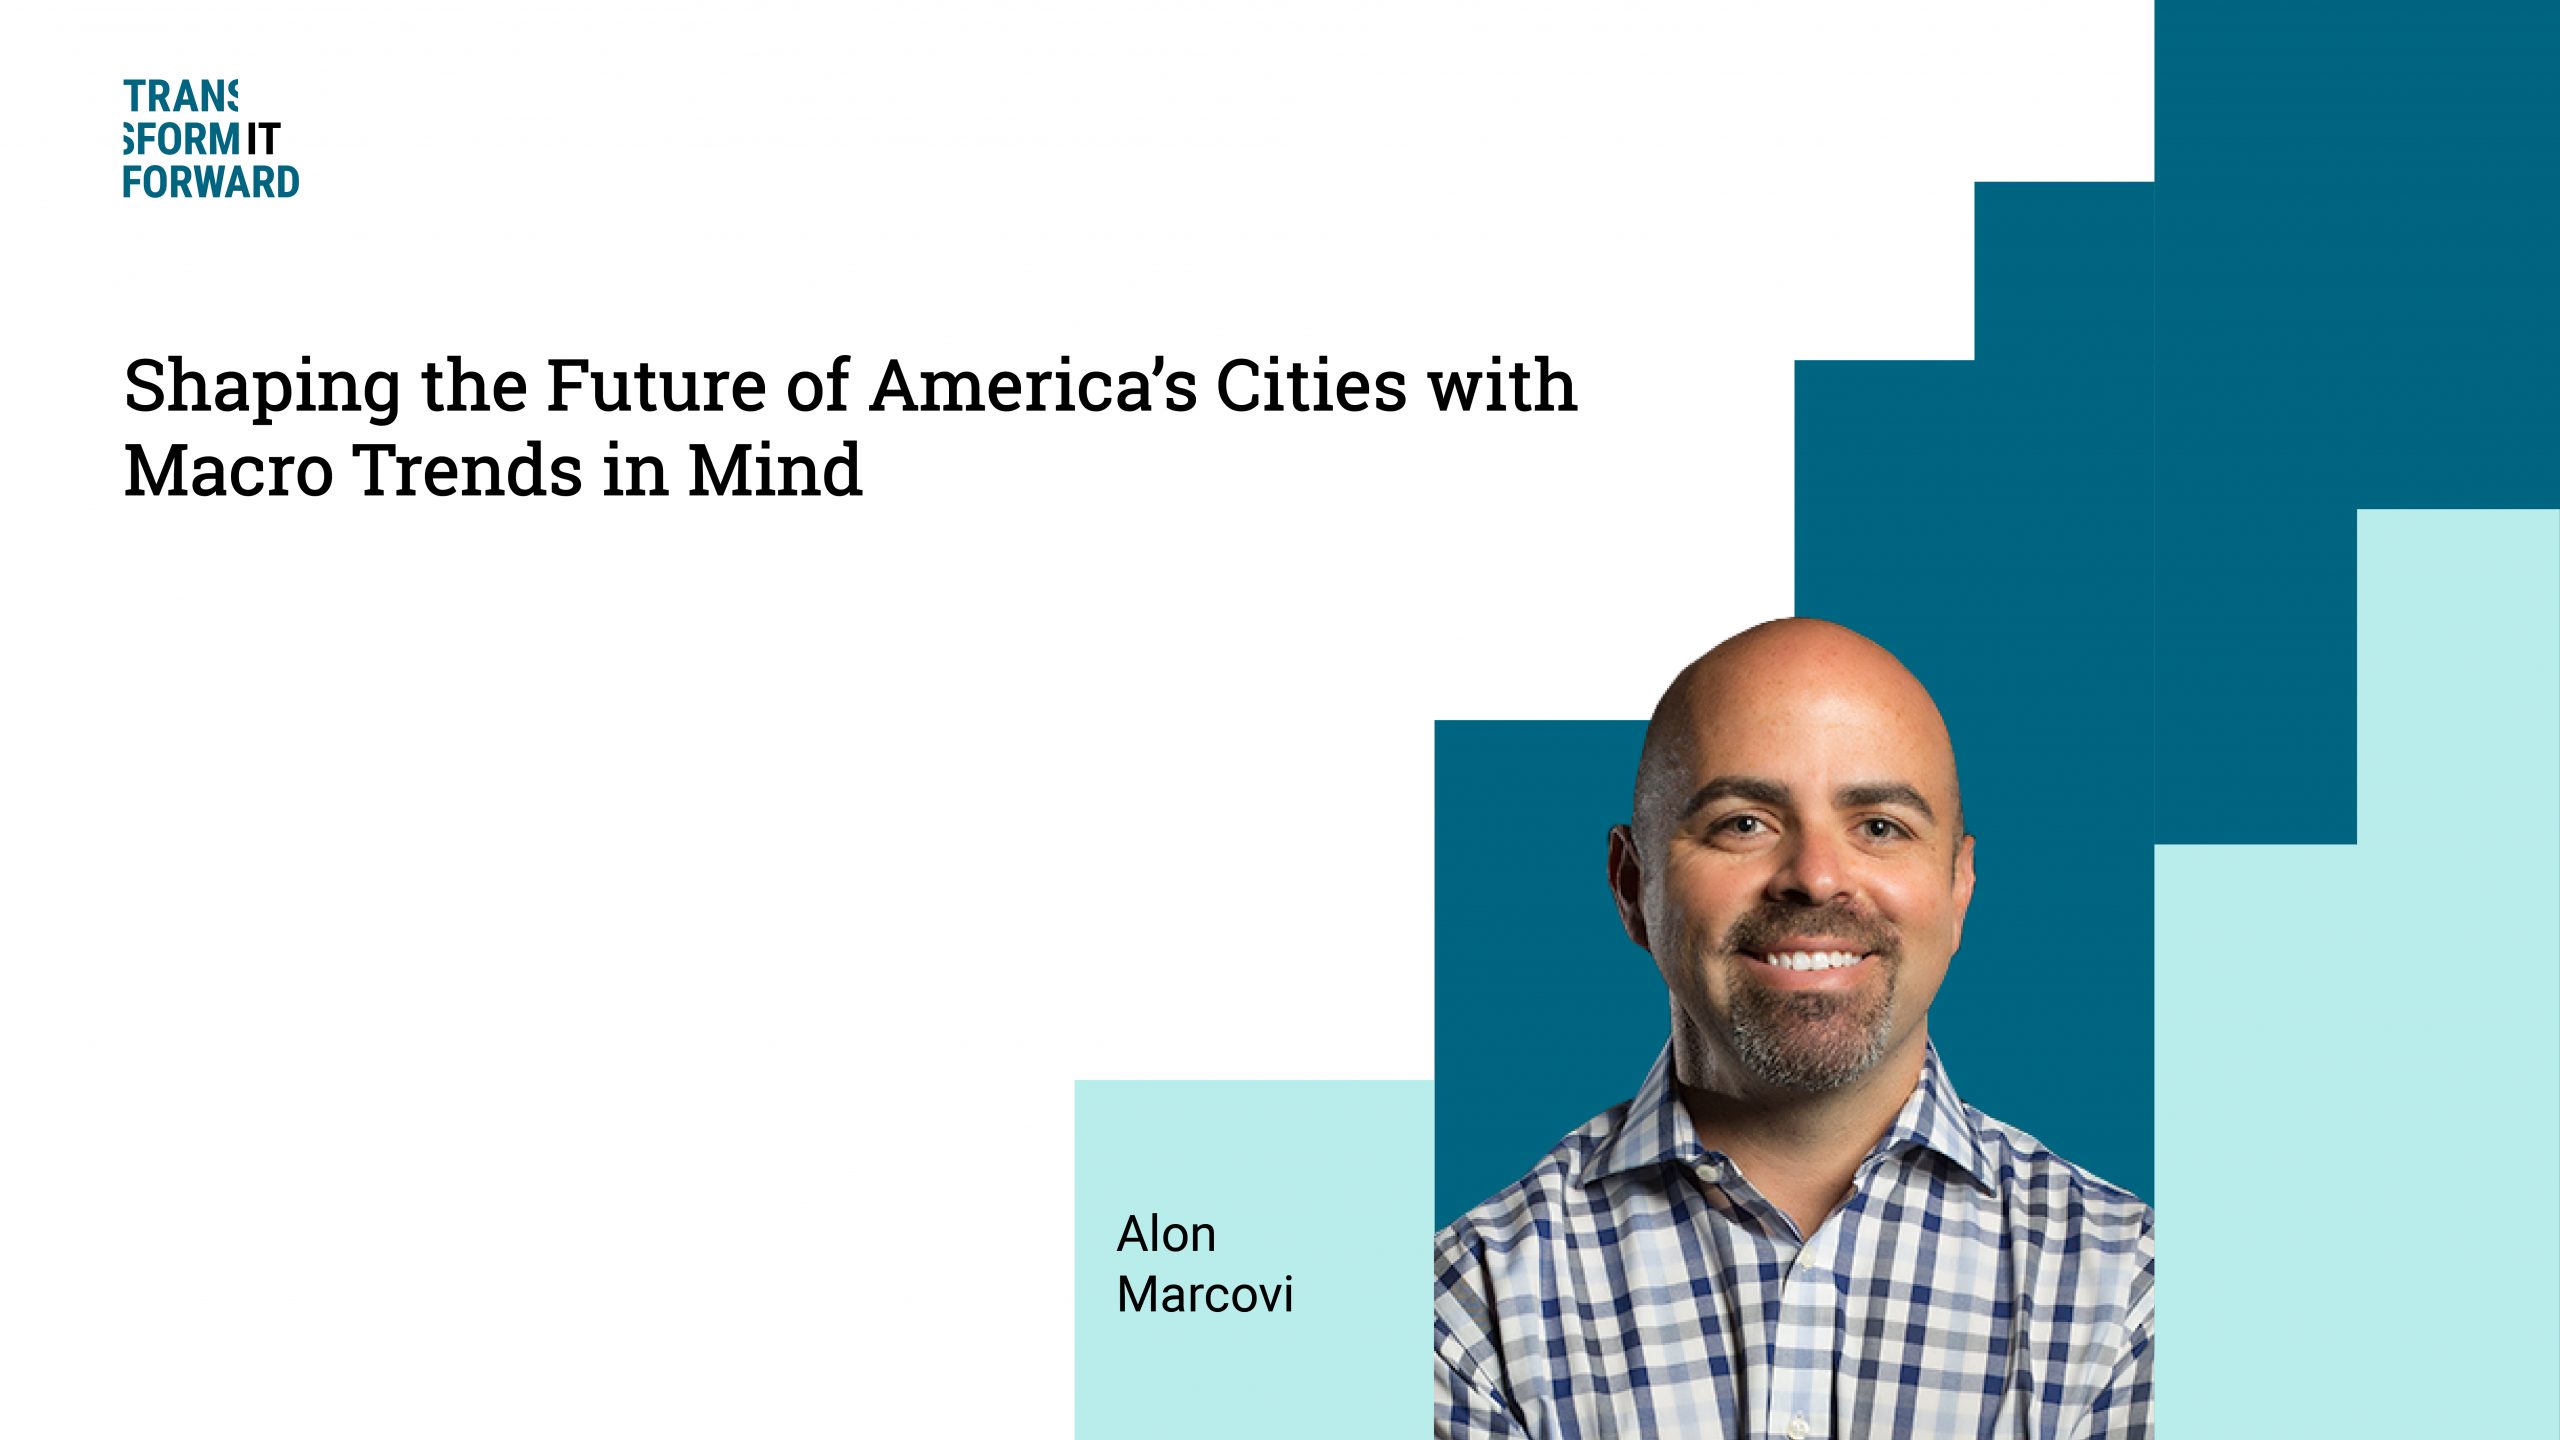 Shaping the future of America’s cities with macro trends in mind